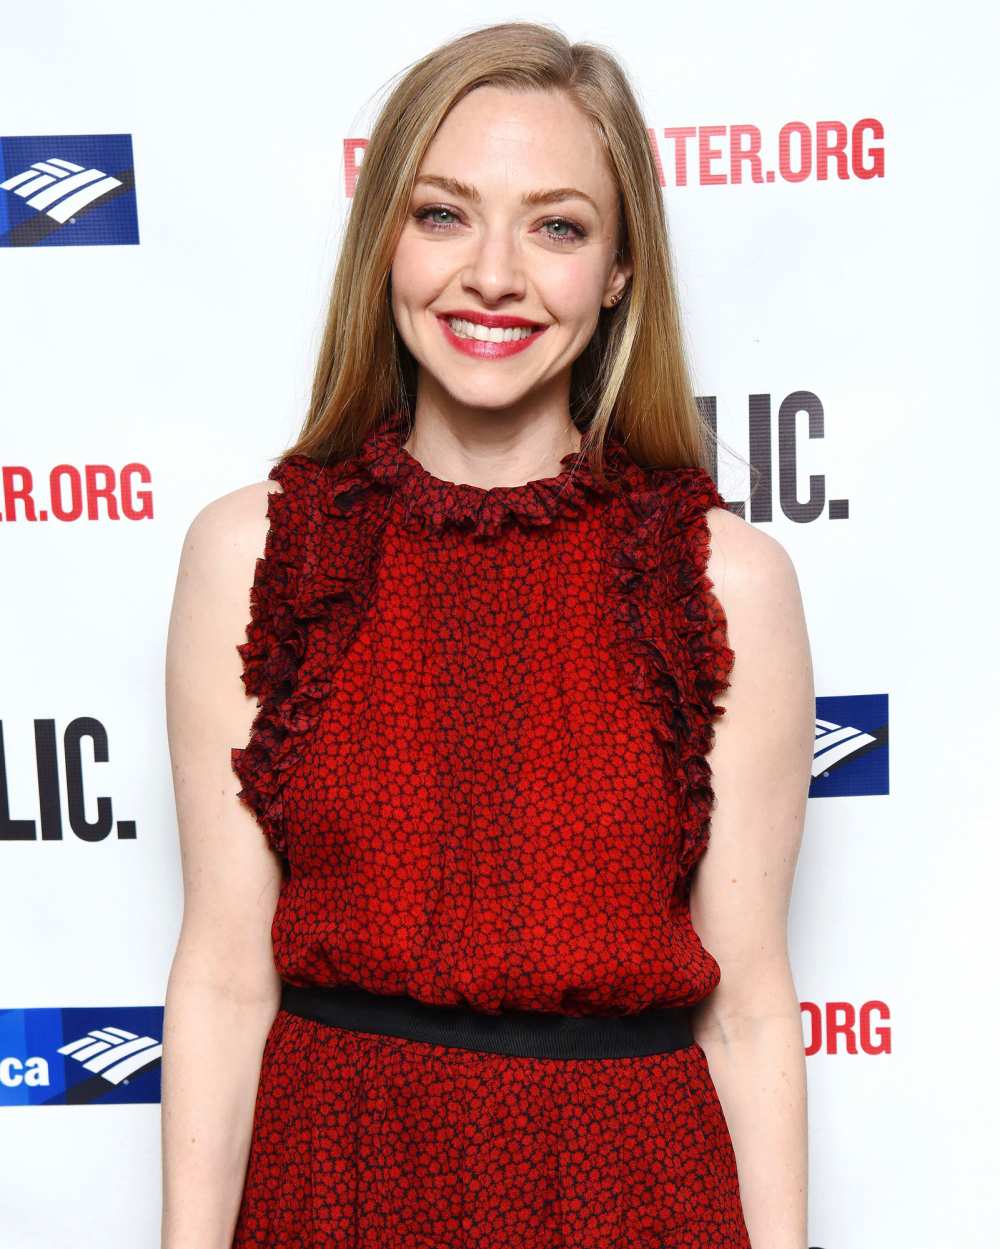 Amanda Seyfried’s Says Her Mom Is ‘Nanny’ to 3-Year-Old Daughter: ‘I Am So Lucky'